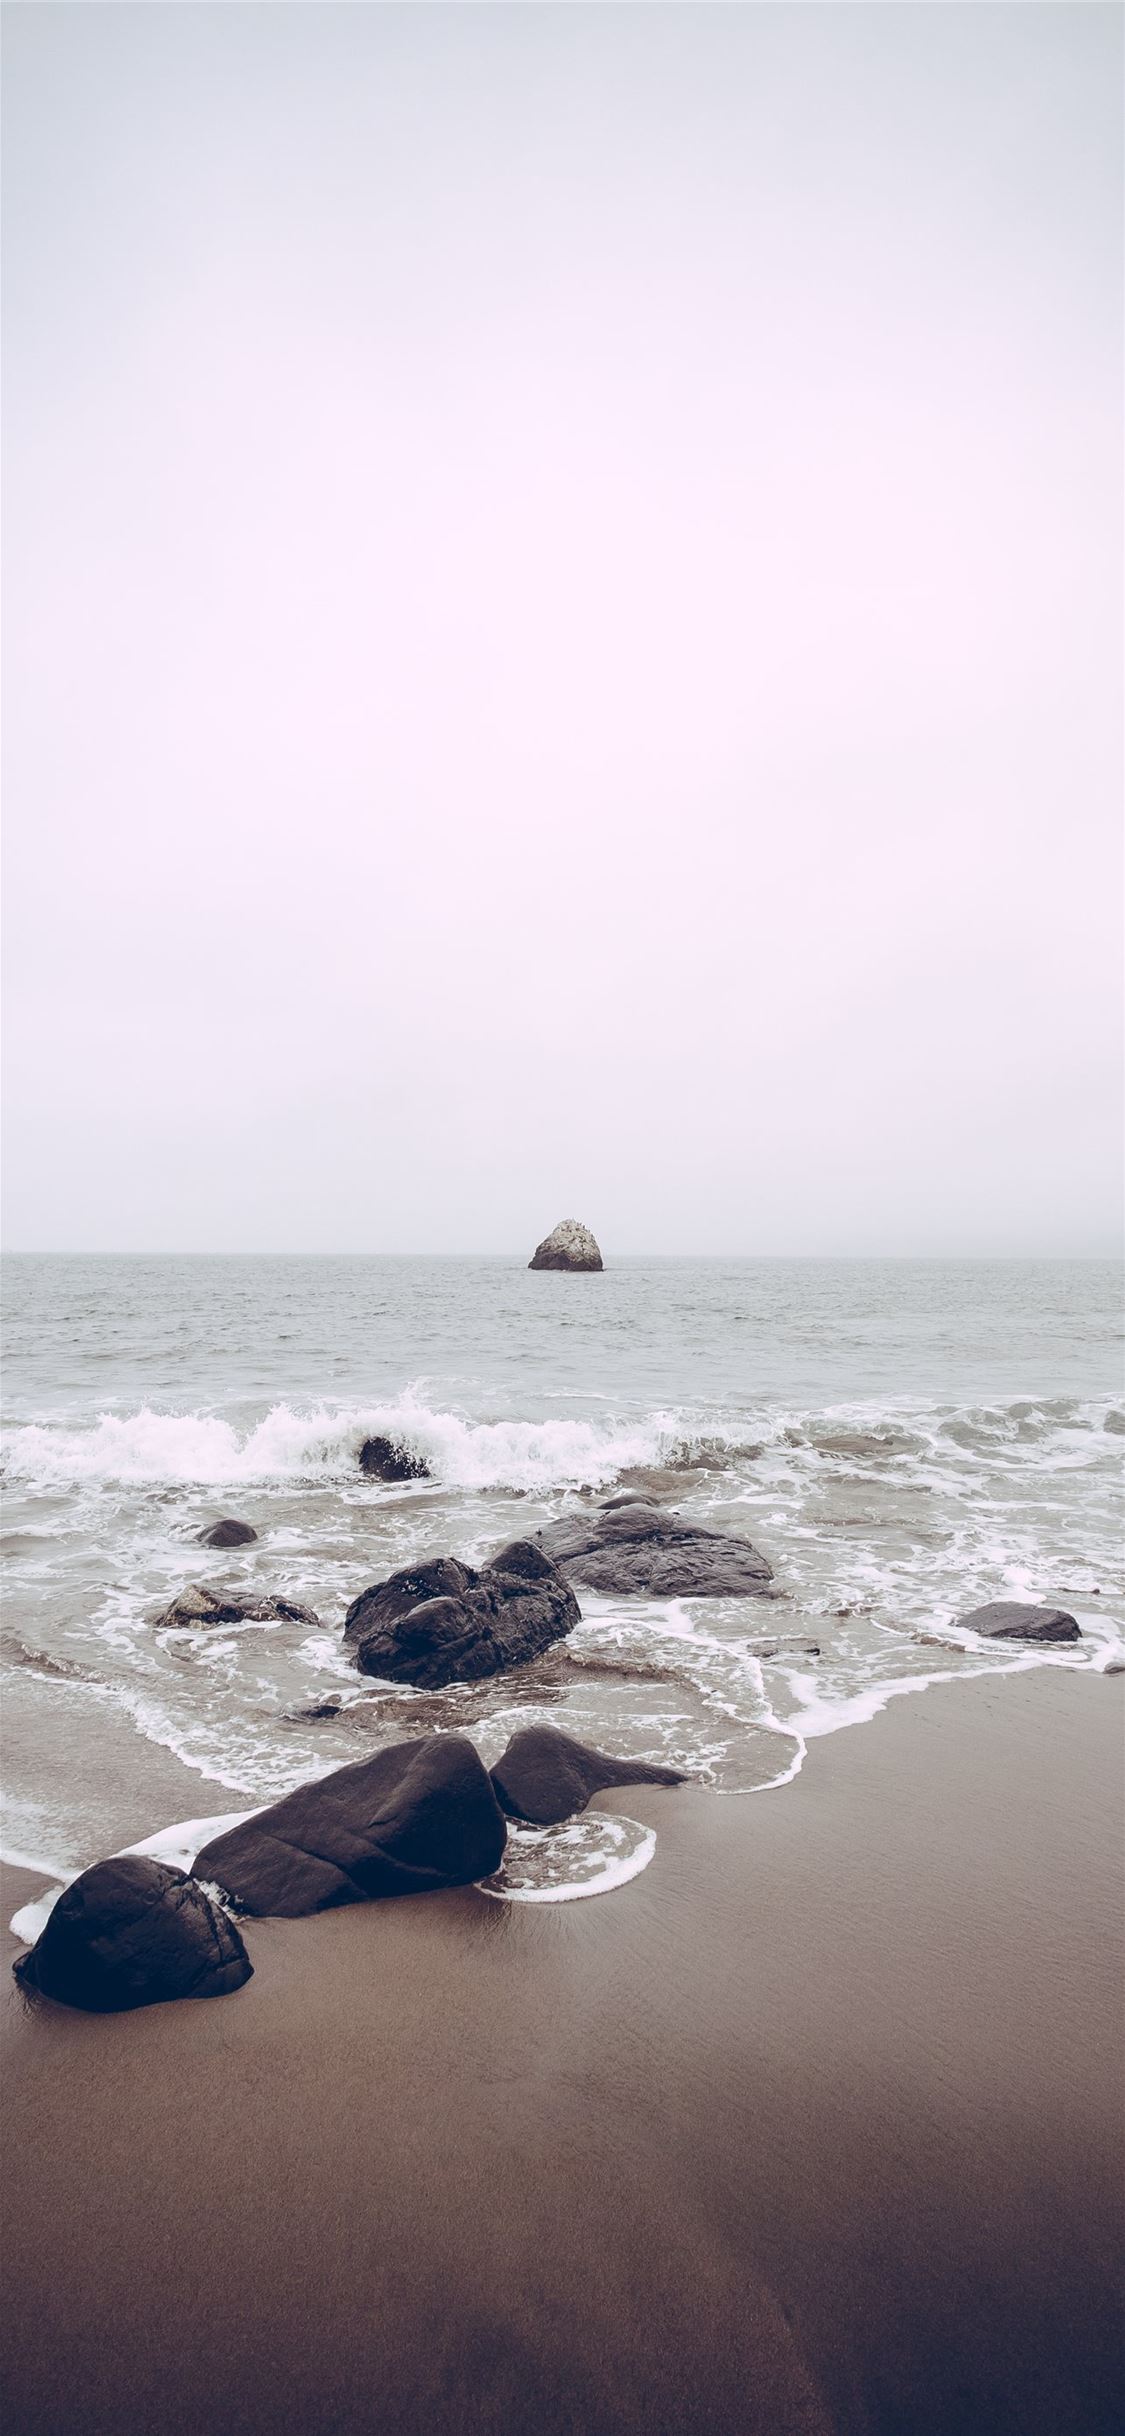 rocks on sea side at daytime iPhone X wallpaper 